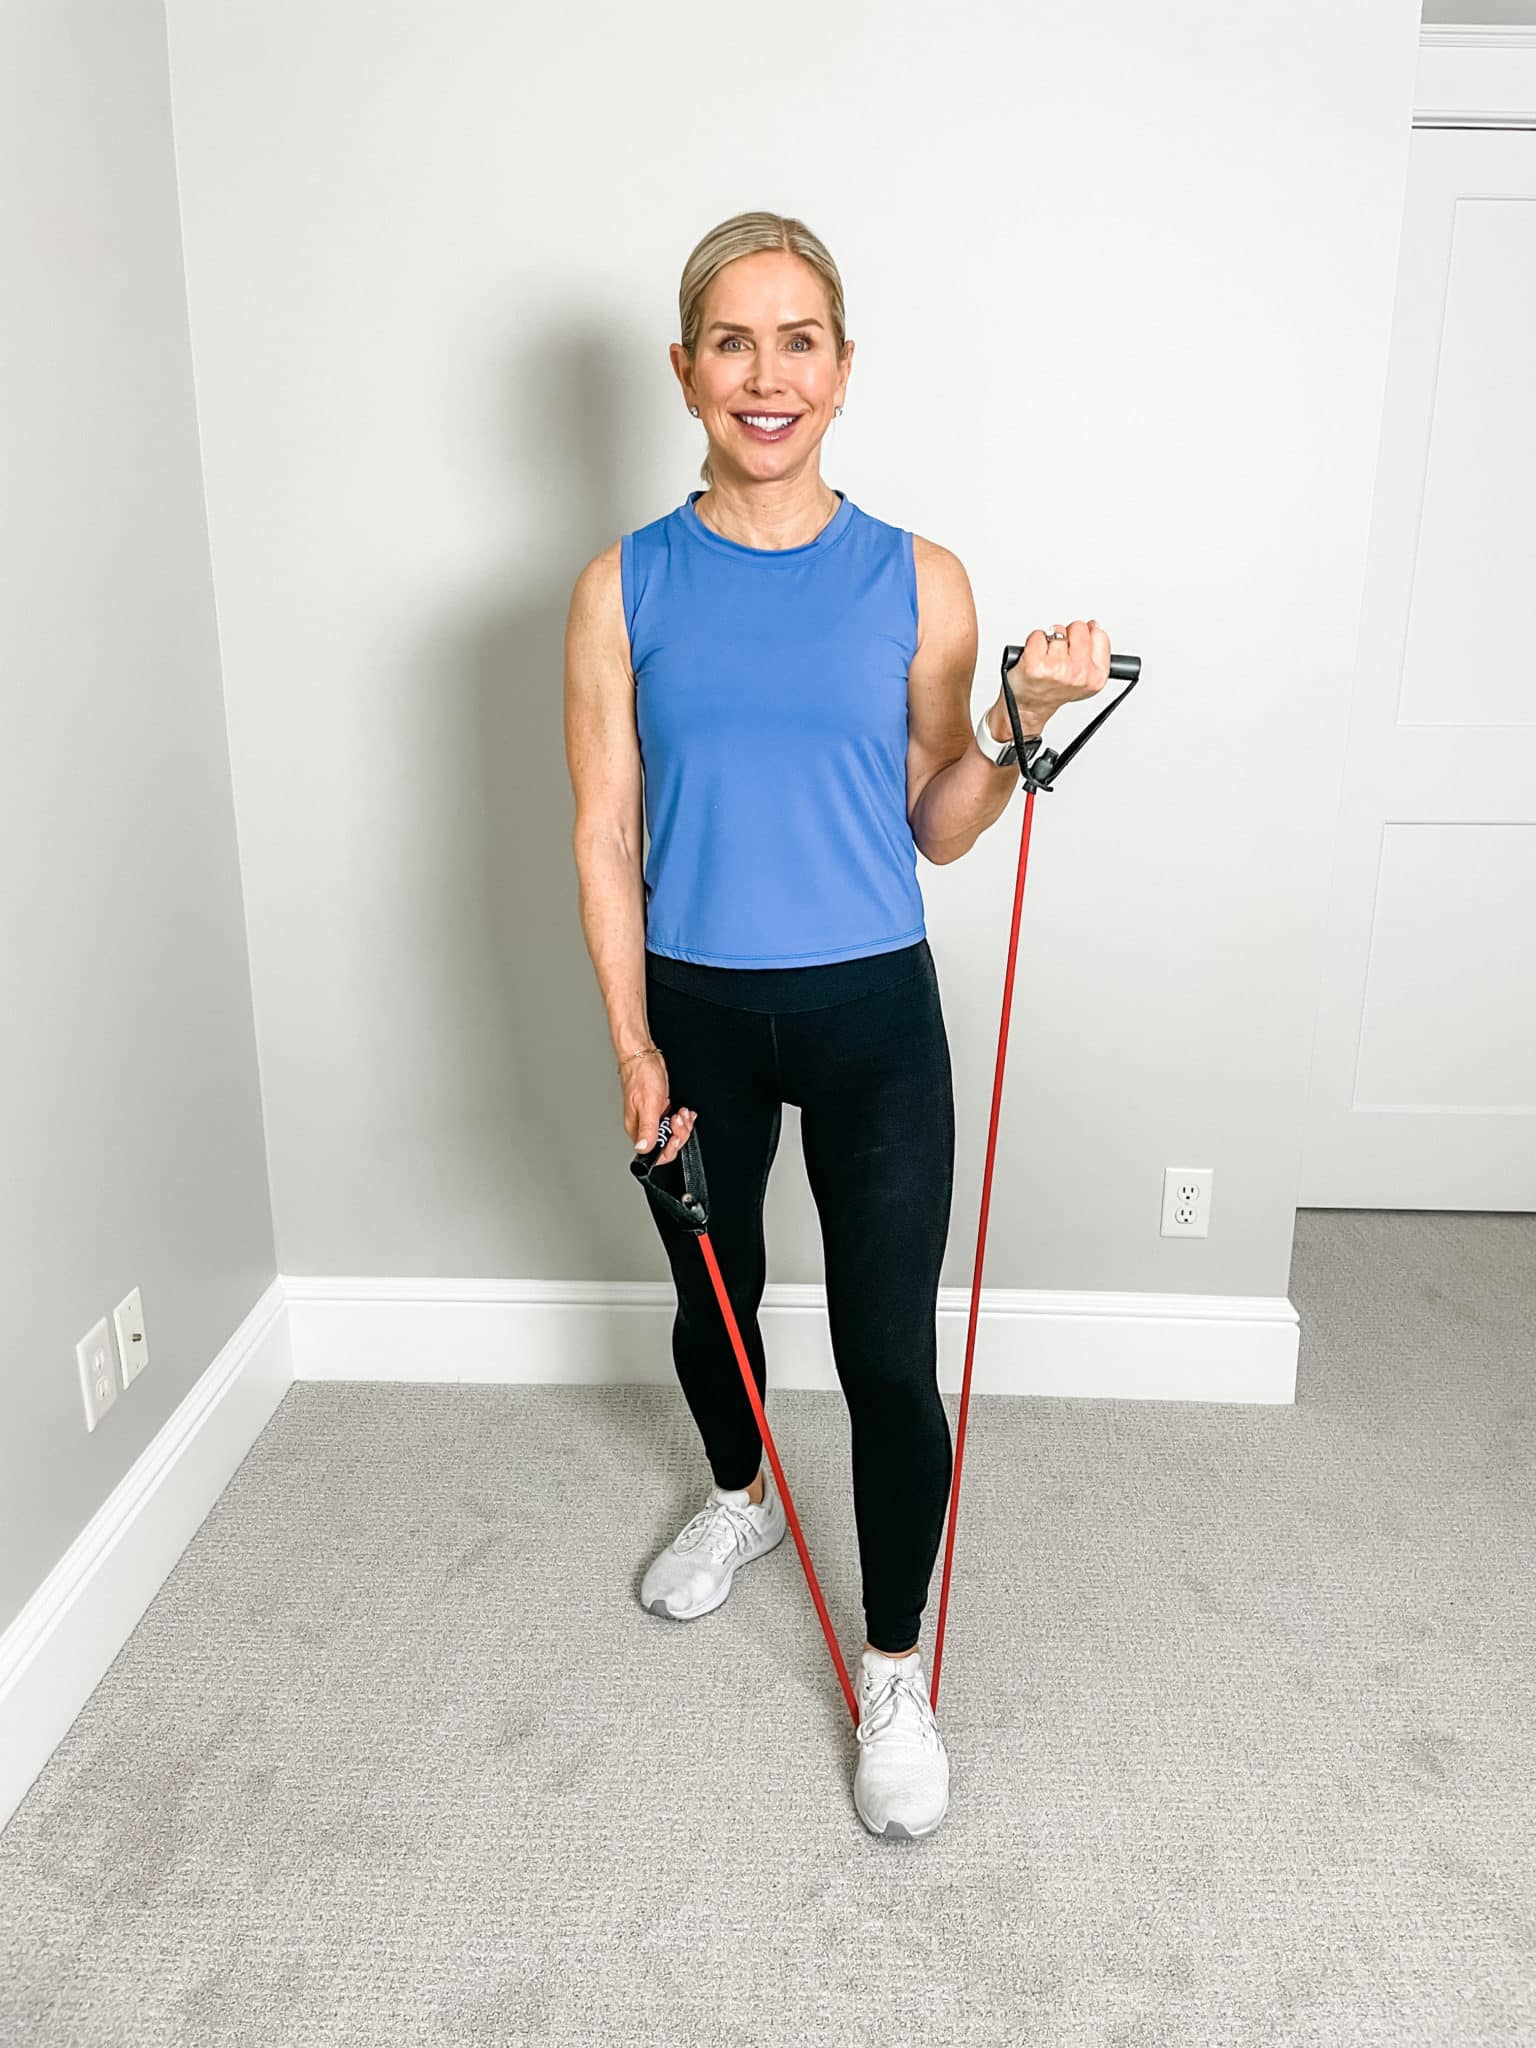 Chris Freytag wearing a blue tank top and black leggings holding a red resistance band for a resistance band workout.